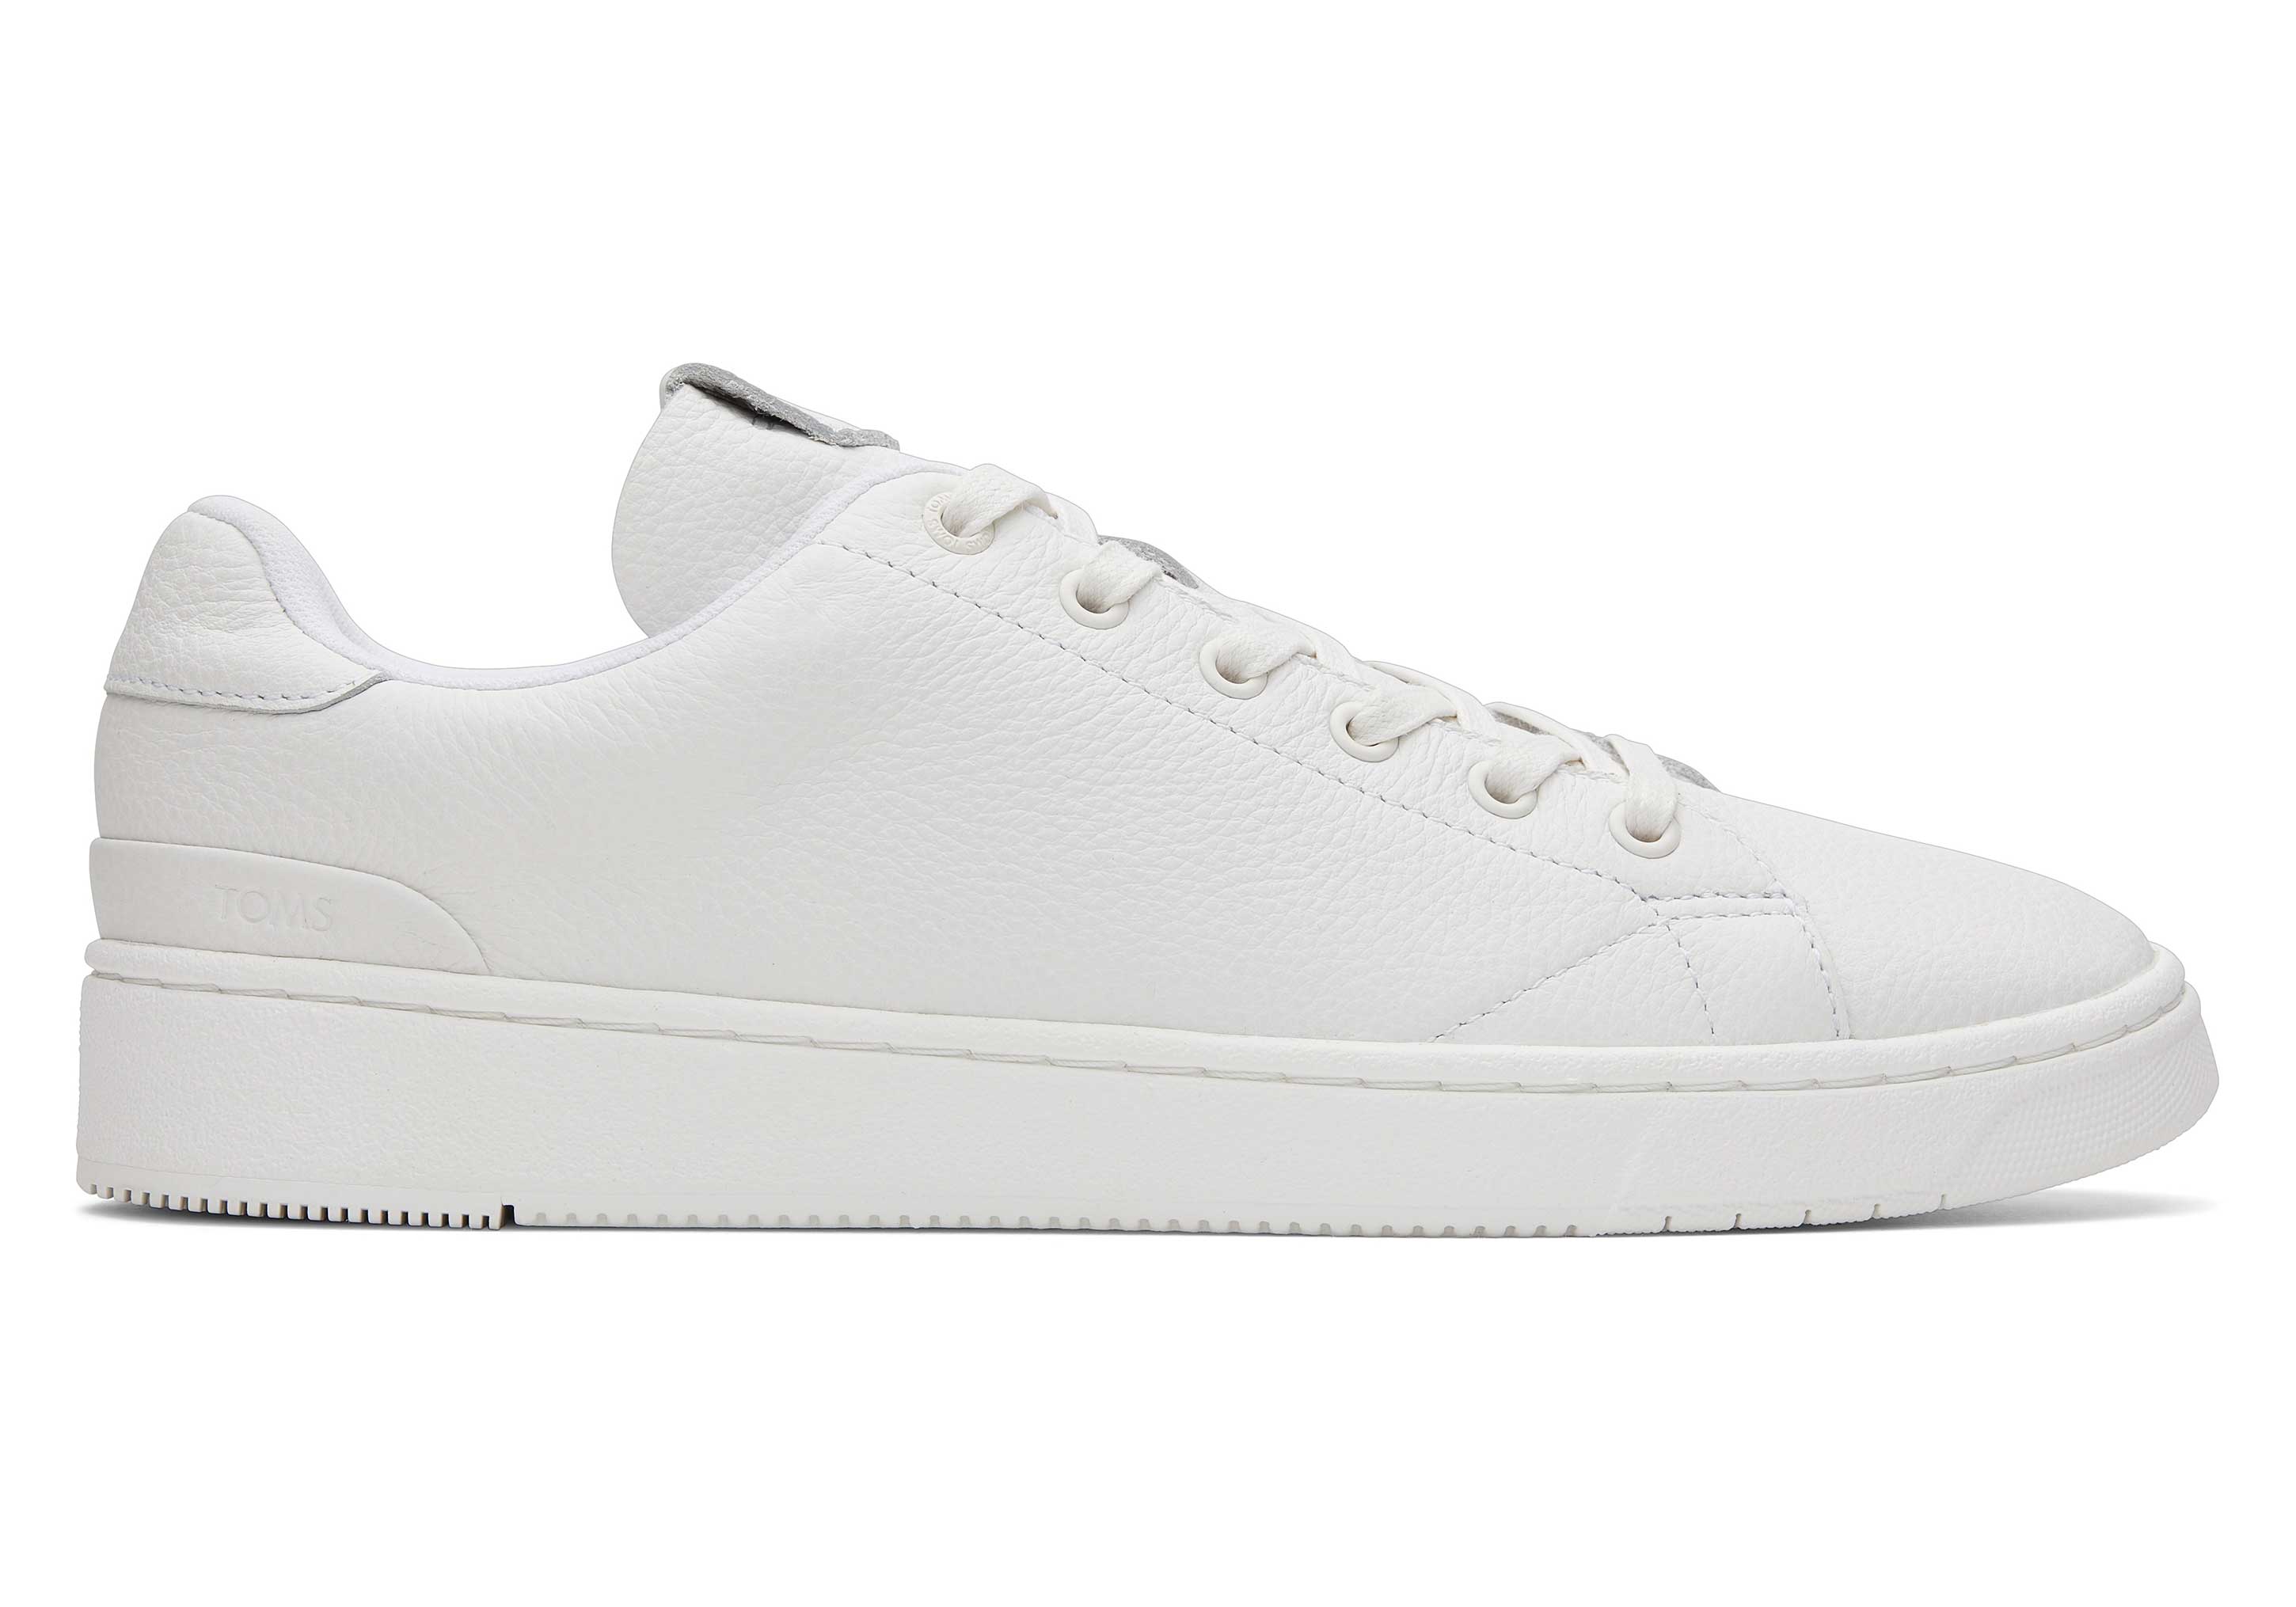 Mens TRVL LITE White Leather Lace-Up Sneaker | TOMS